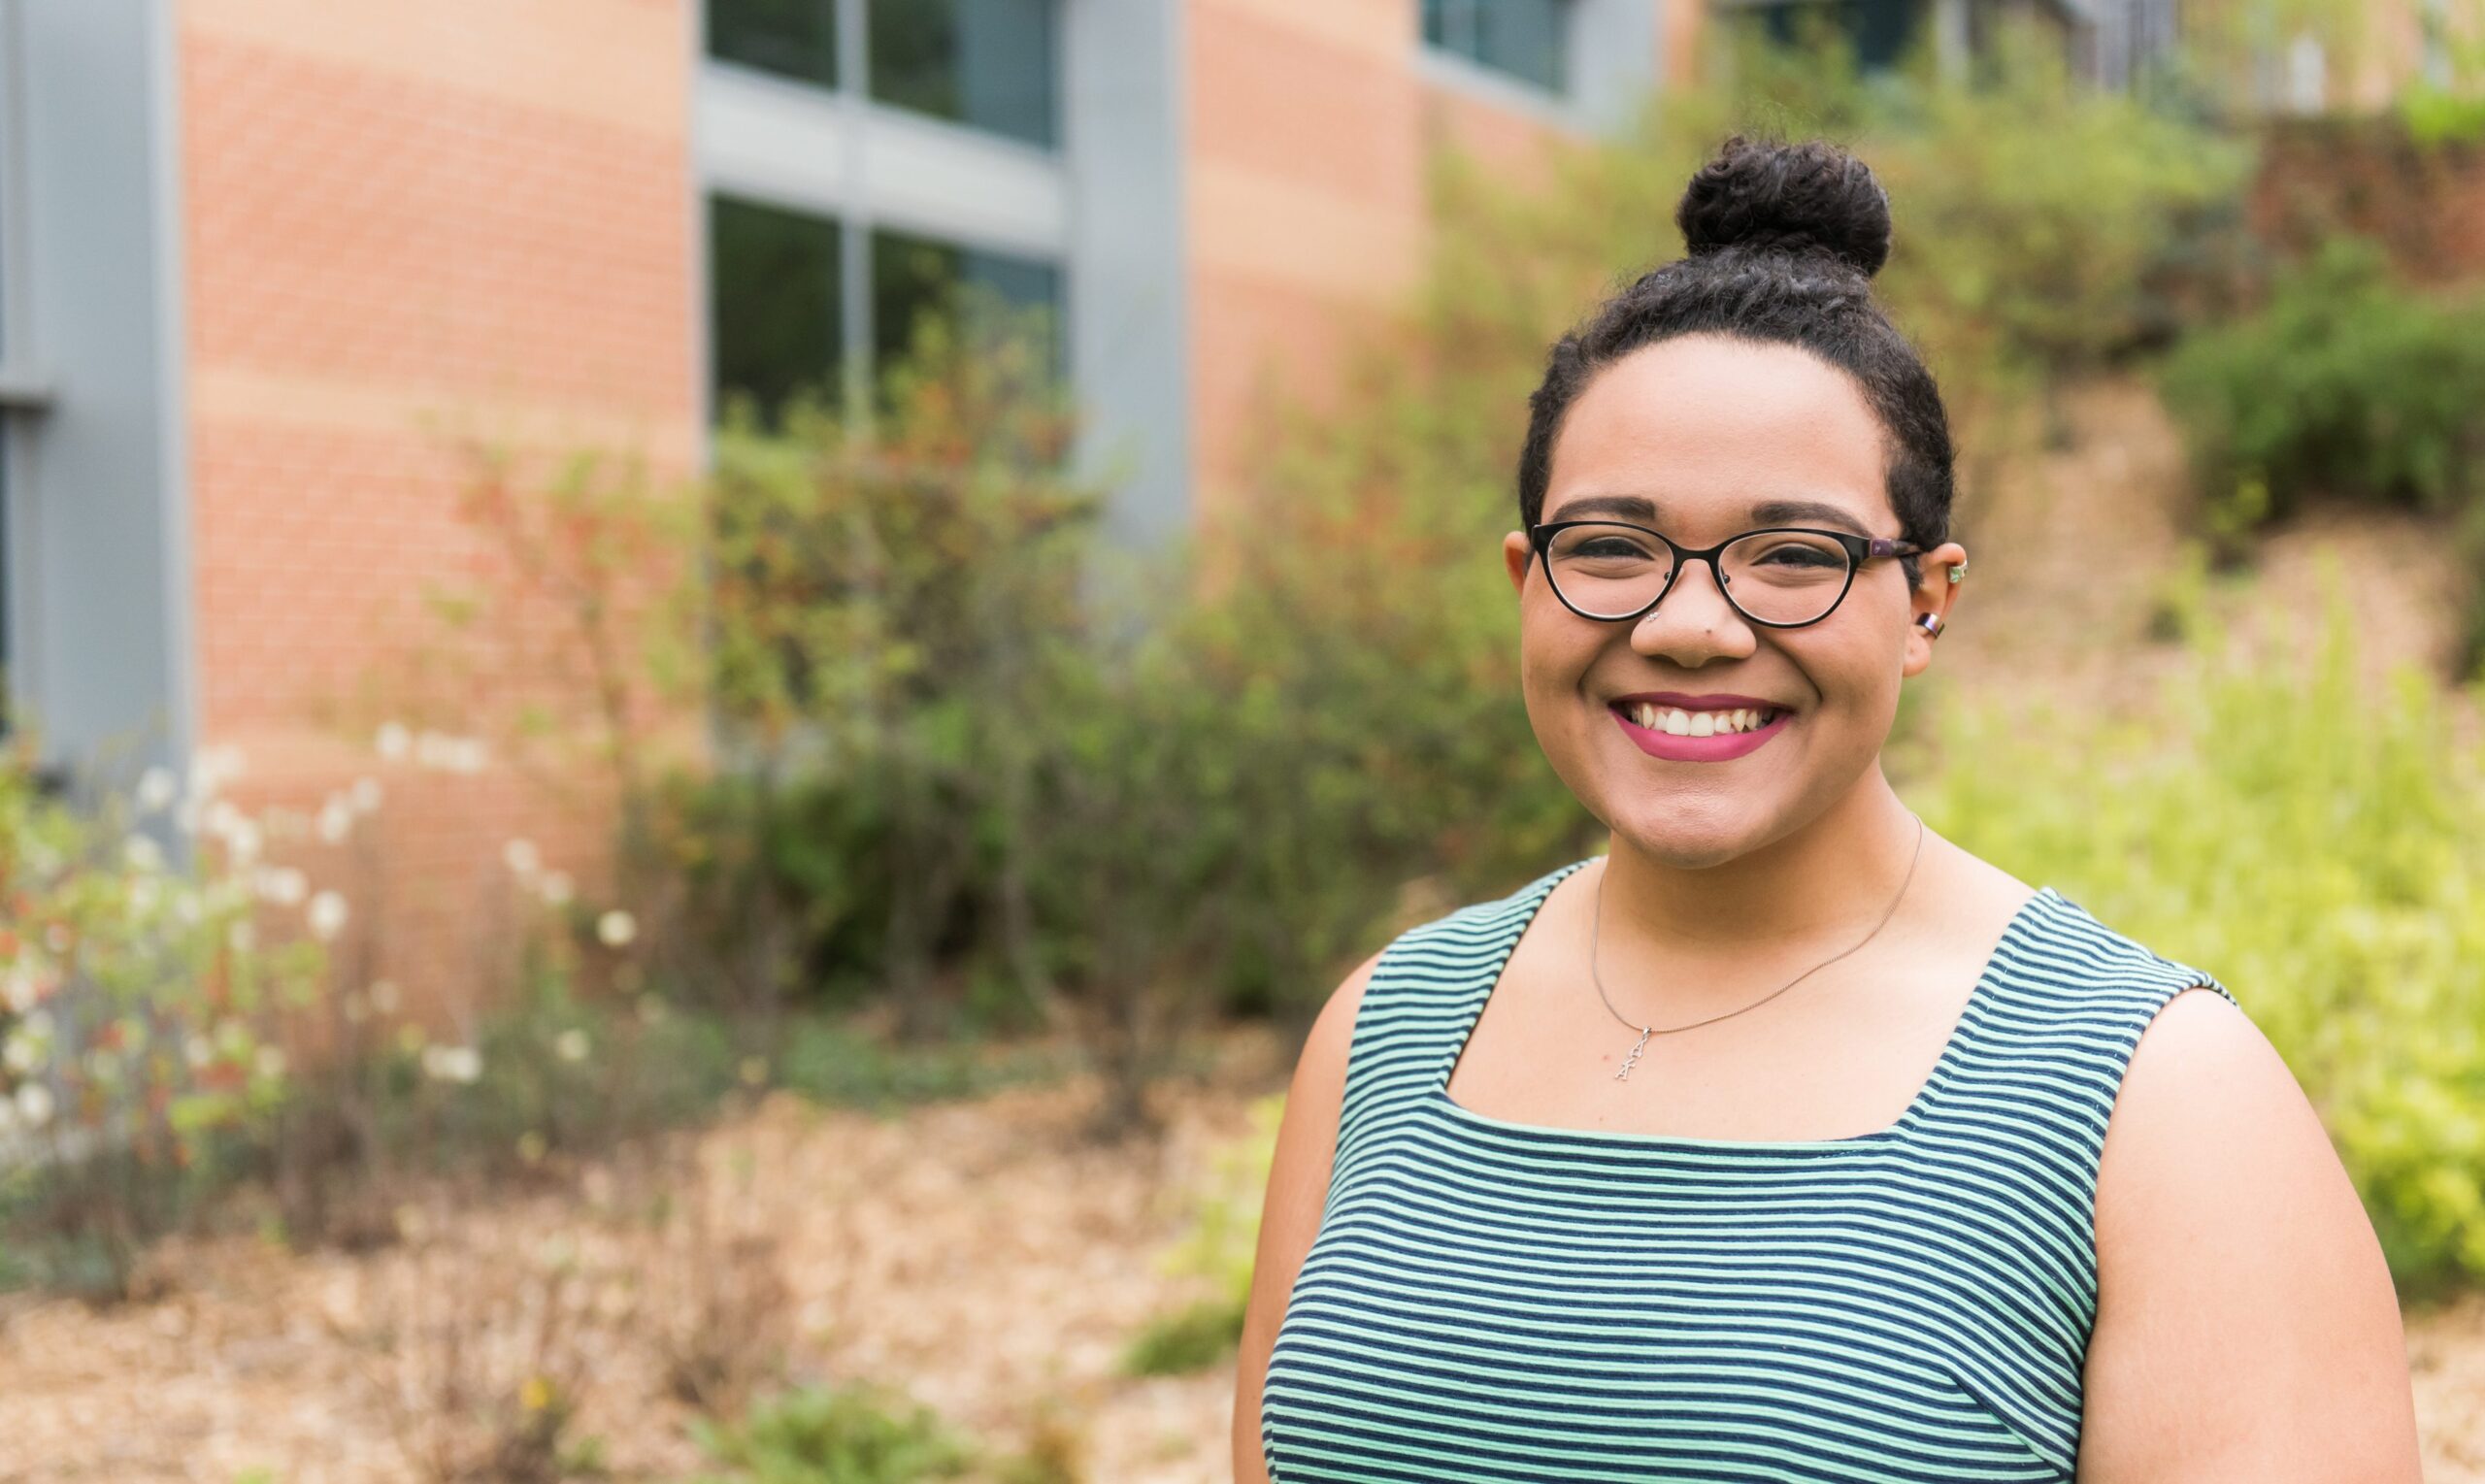 Kaitlin Smith, leader in vibrant campus life, to pursue graduate study in student affairs